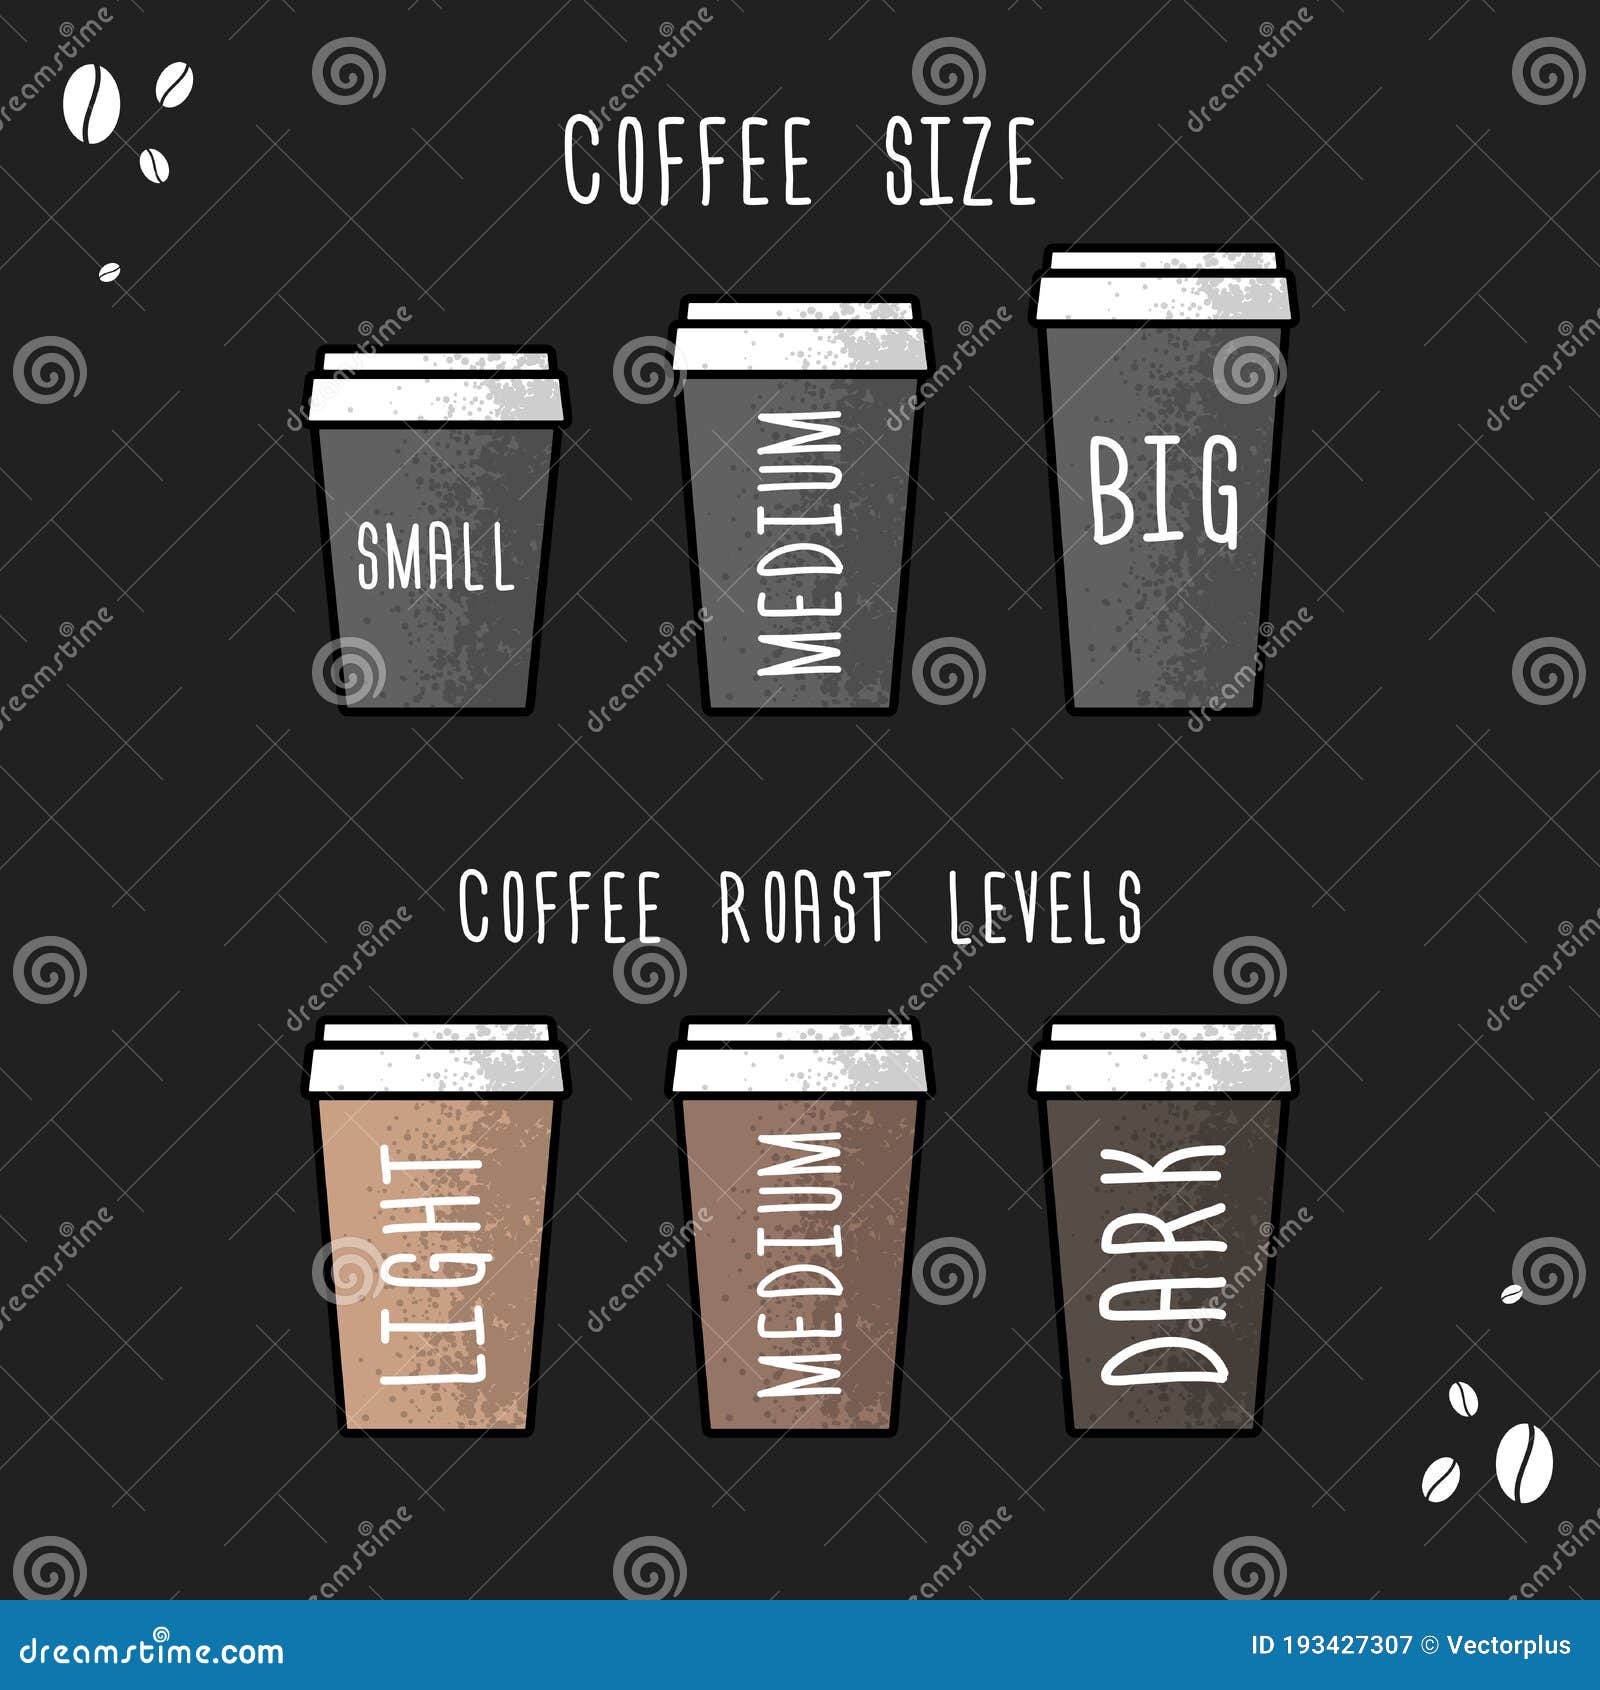 Poster Coffee Cup Size and Coffee Roast Levels. Vector Flat